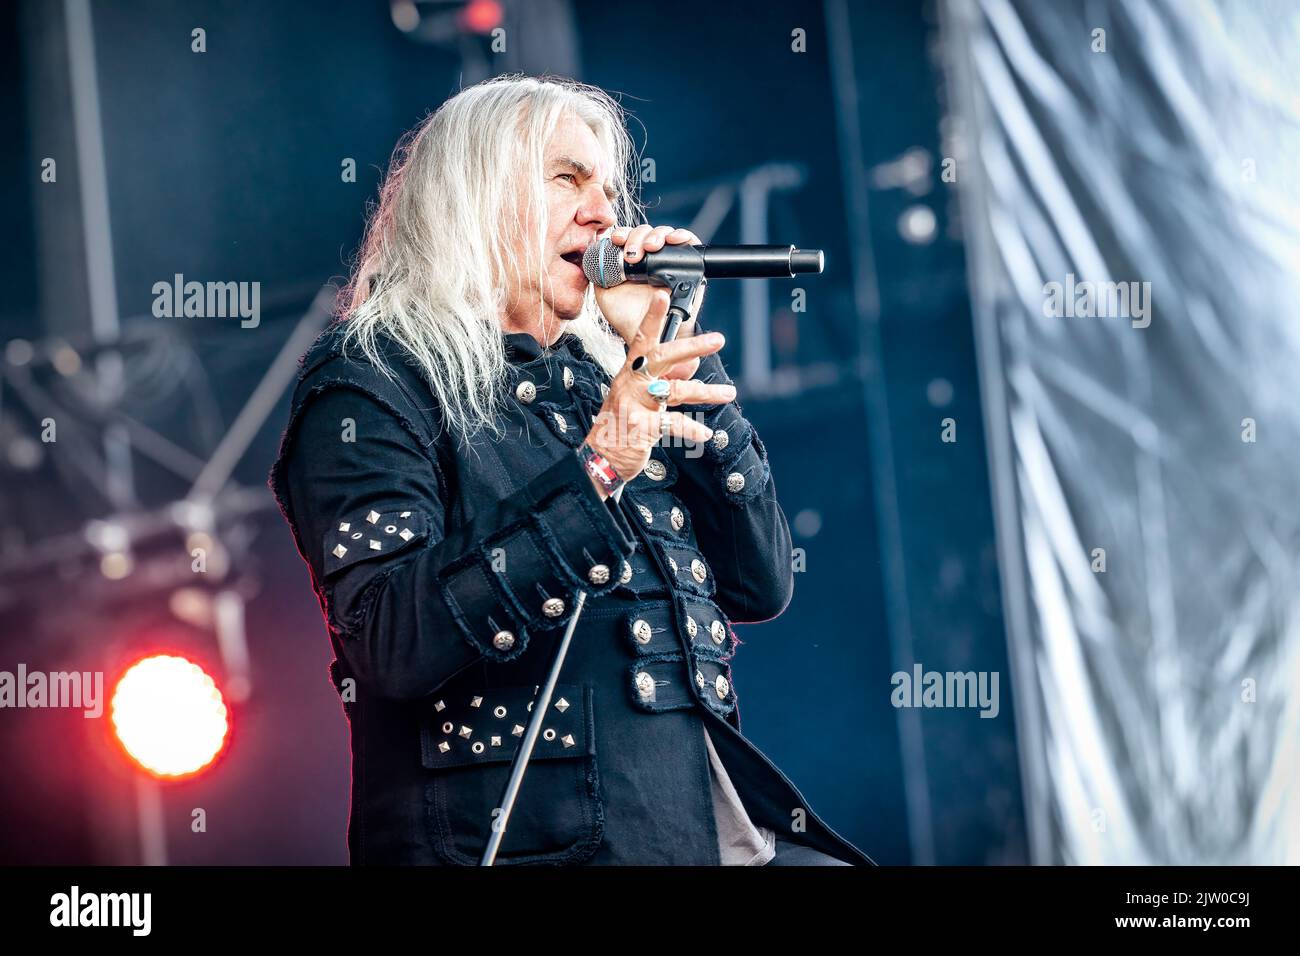 Solvesborg, Sweden. 10th, June 2022. The British heavy metal band Saxon performs a live concert during the Swedish music festival Sweden Rock Festival 2022 in Solvesborg. Here vocalist Biff Byford is seen live on stage. (Photo credit: Gonzales Photo - Terje Dokken). Stock Photo